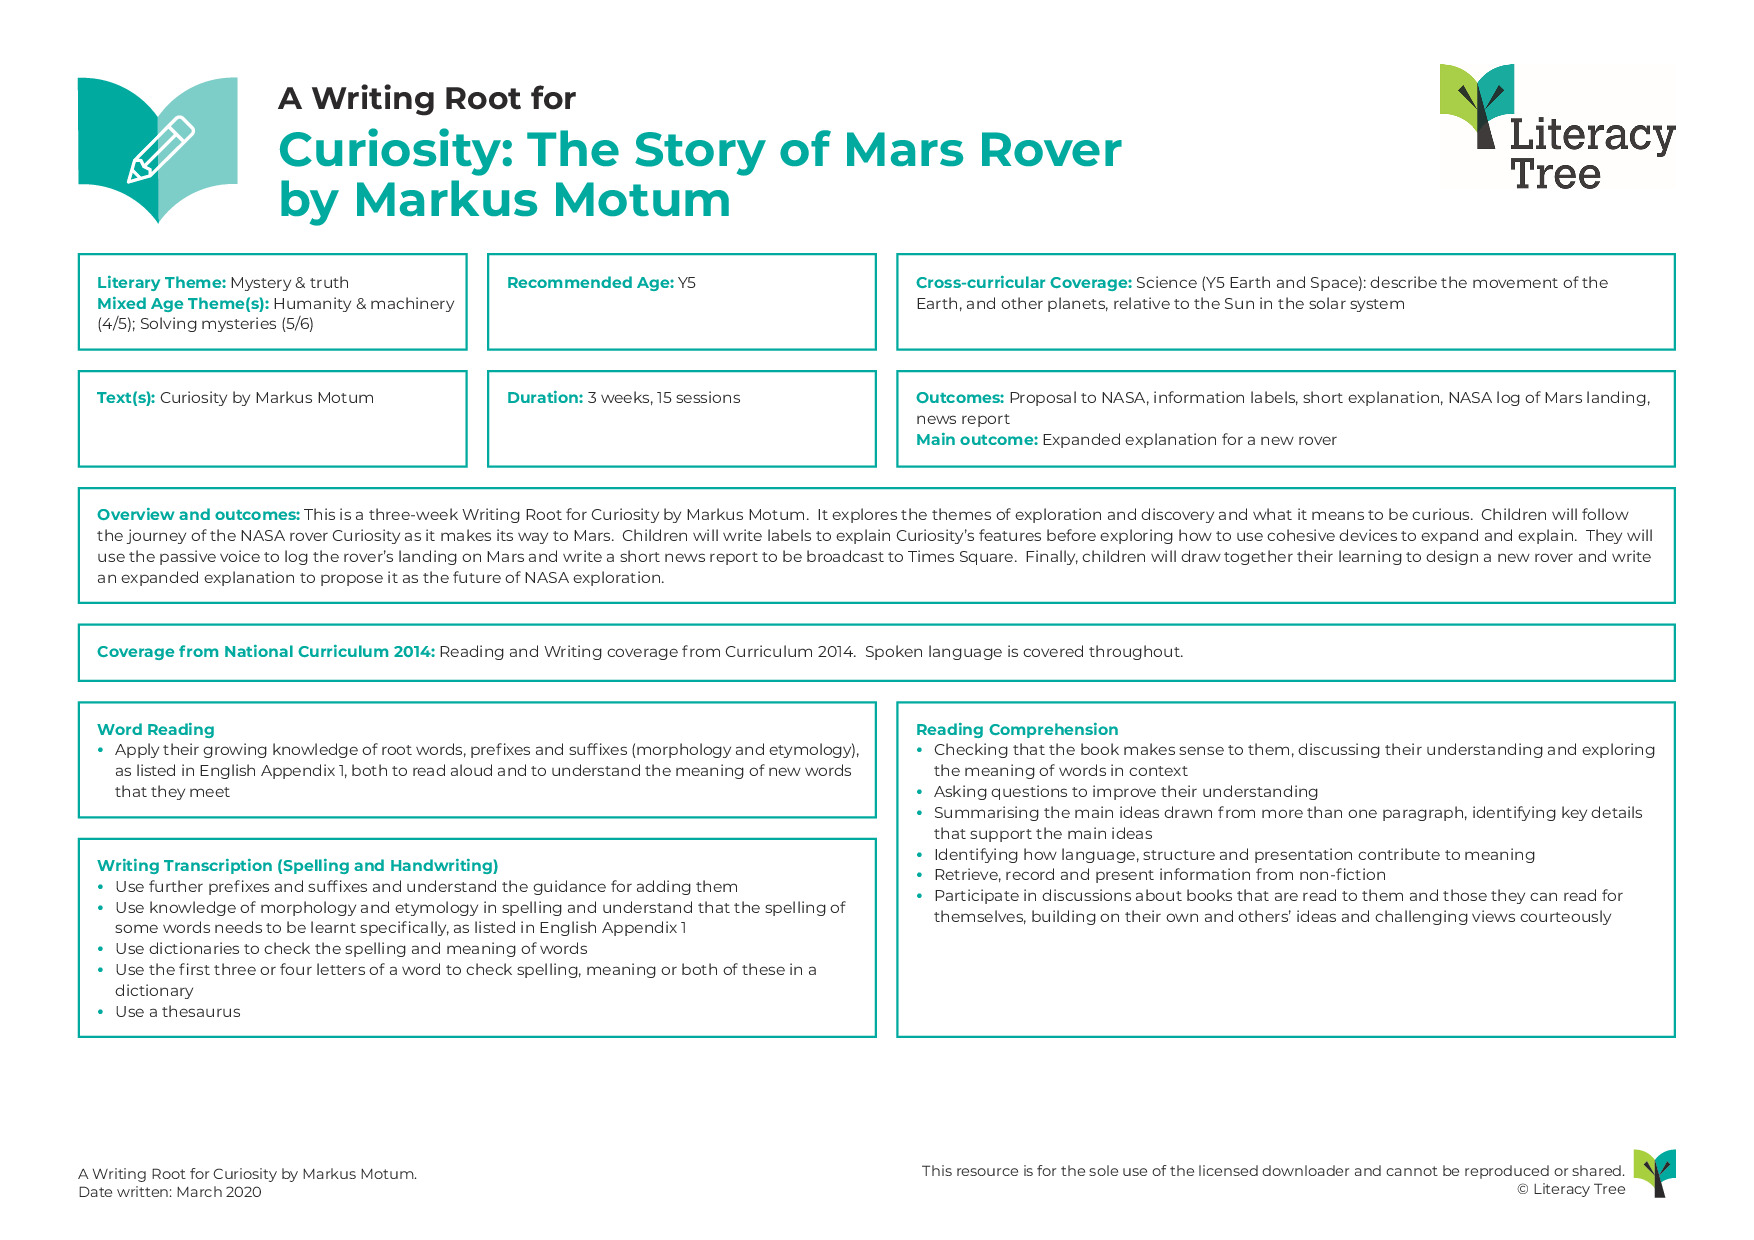 A Writing Root for Curiosity: The Story of a Mars Rover